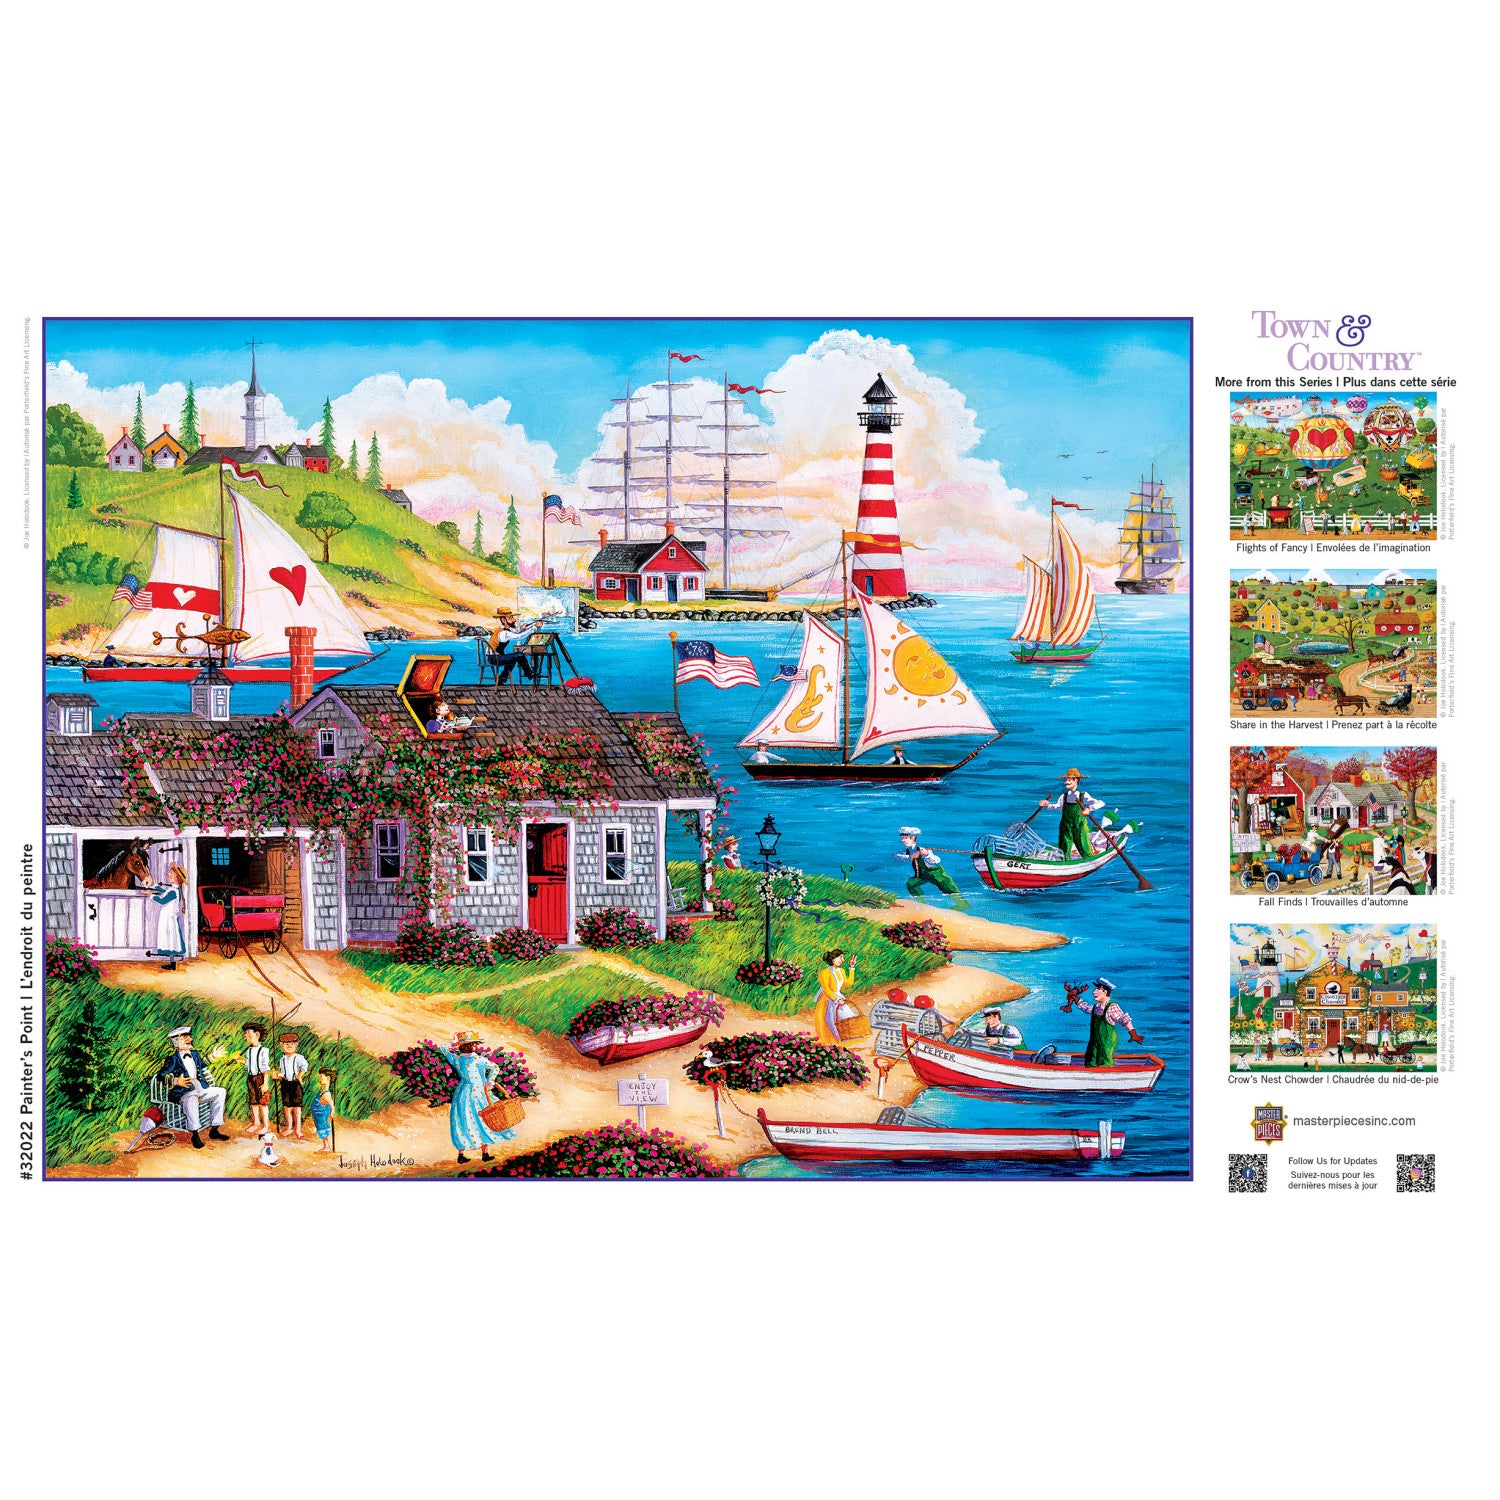 Town & Country - Painter's Point 300 Piece EZ Grip Jigsaw Puzzle